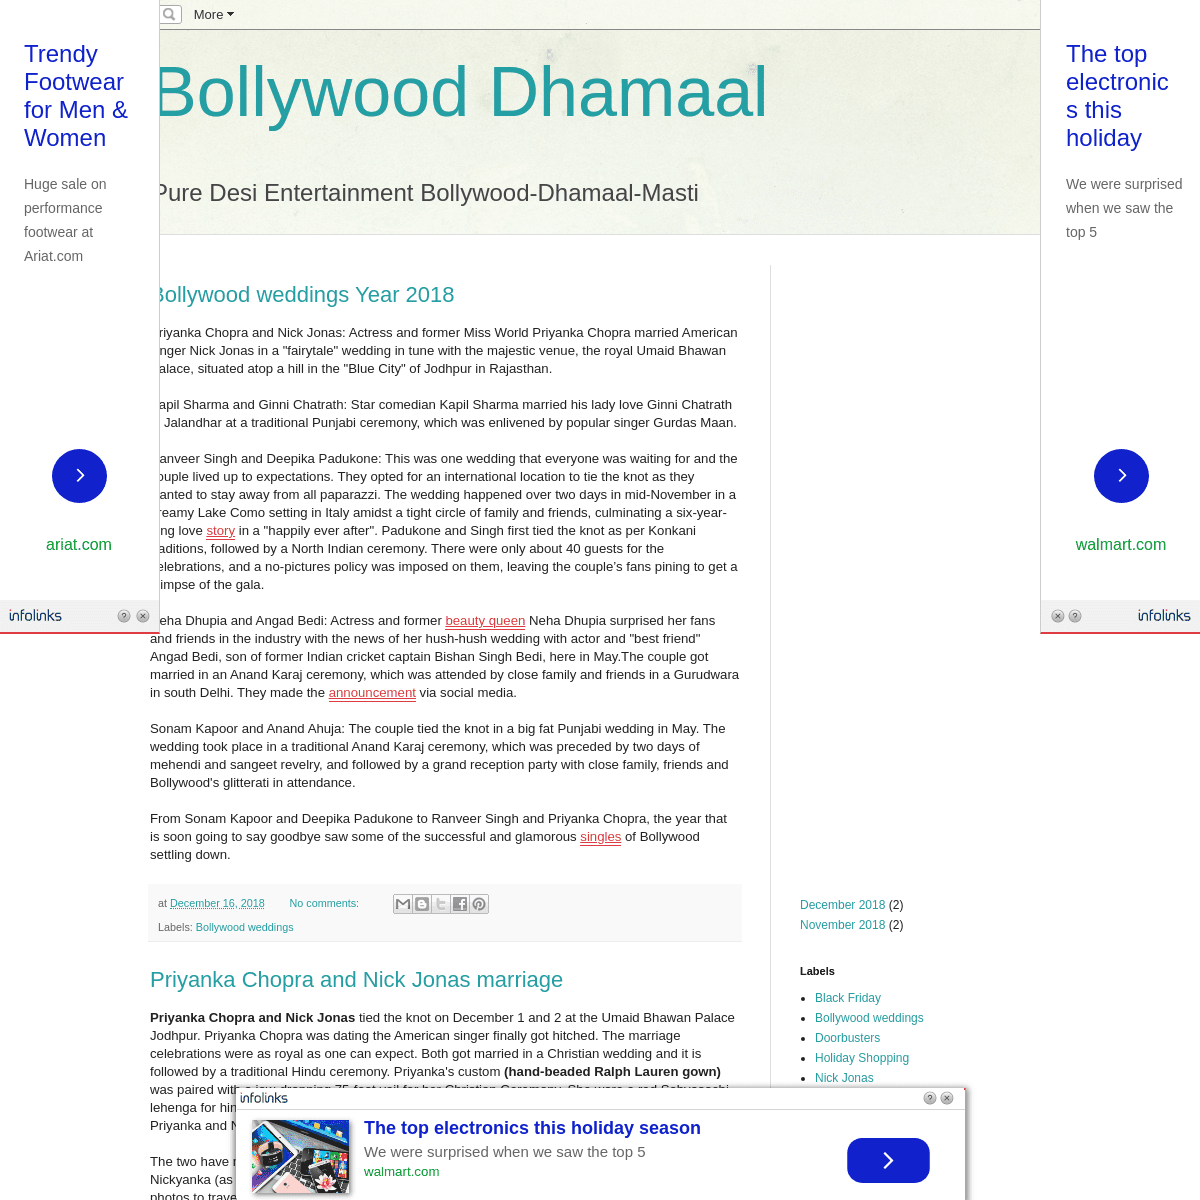 A complete backup of bollywooddhamaal.com